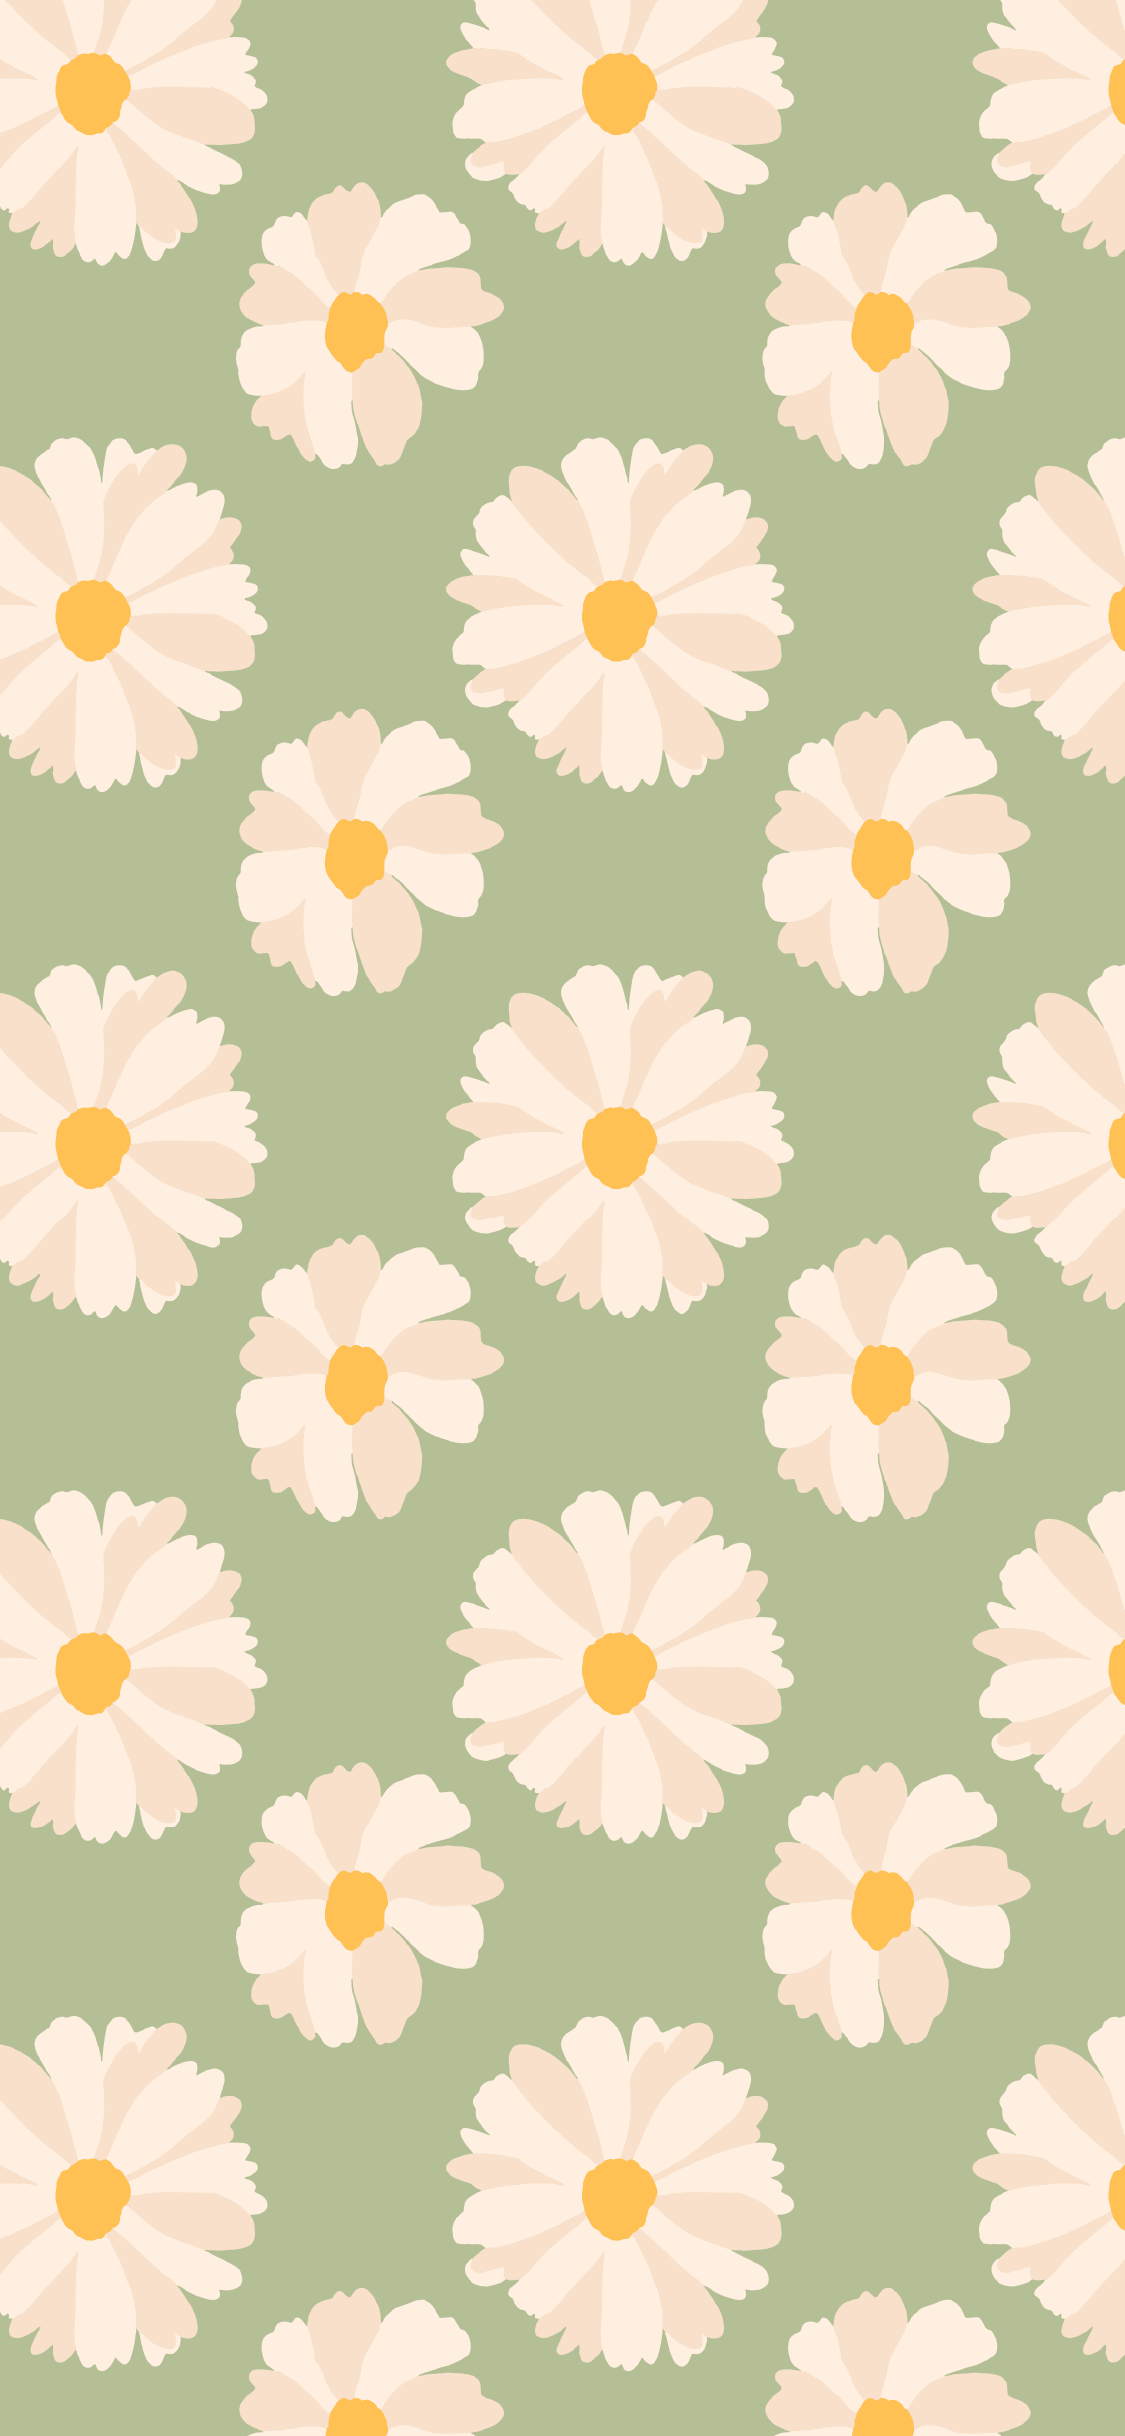 iPhone Wallpaper for Spring 2020. Floral wallpaper iphone, Simple iphone wallpaper, iPhone wallpaper green